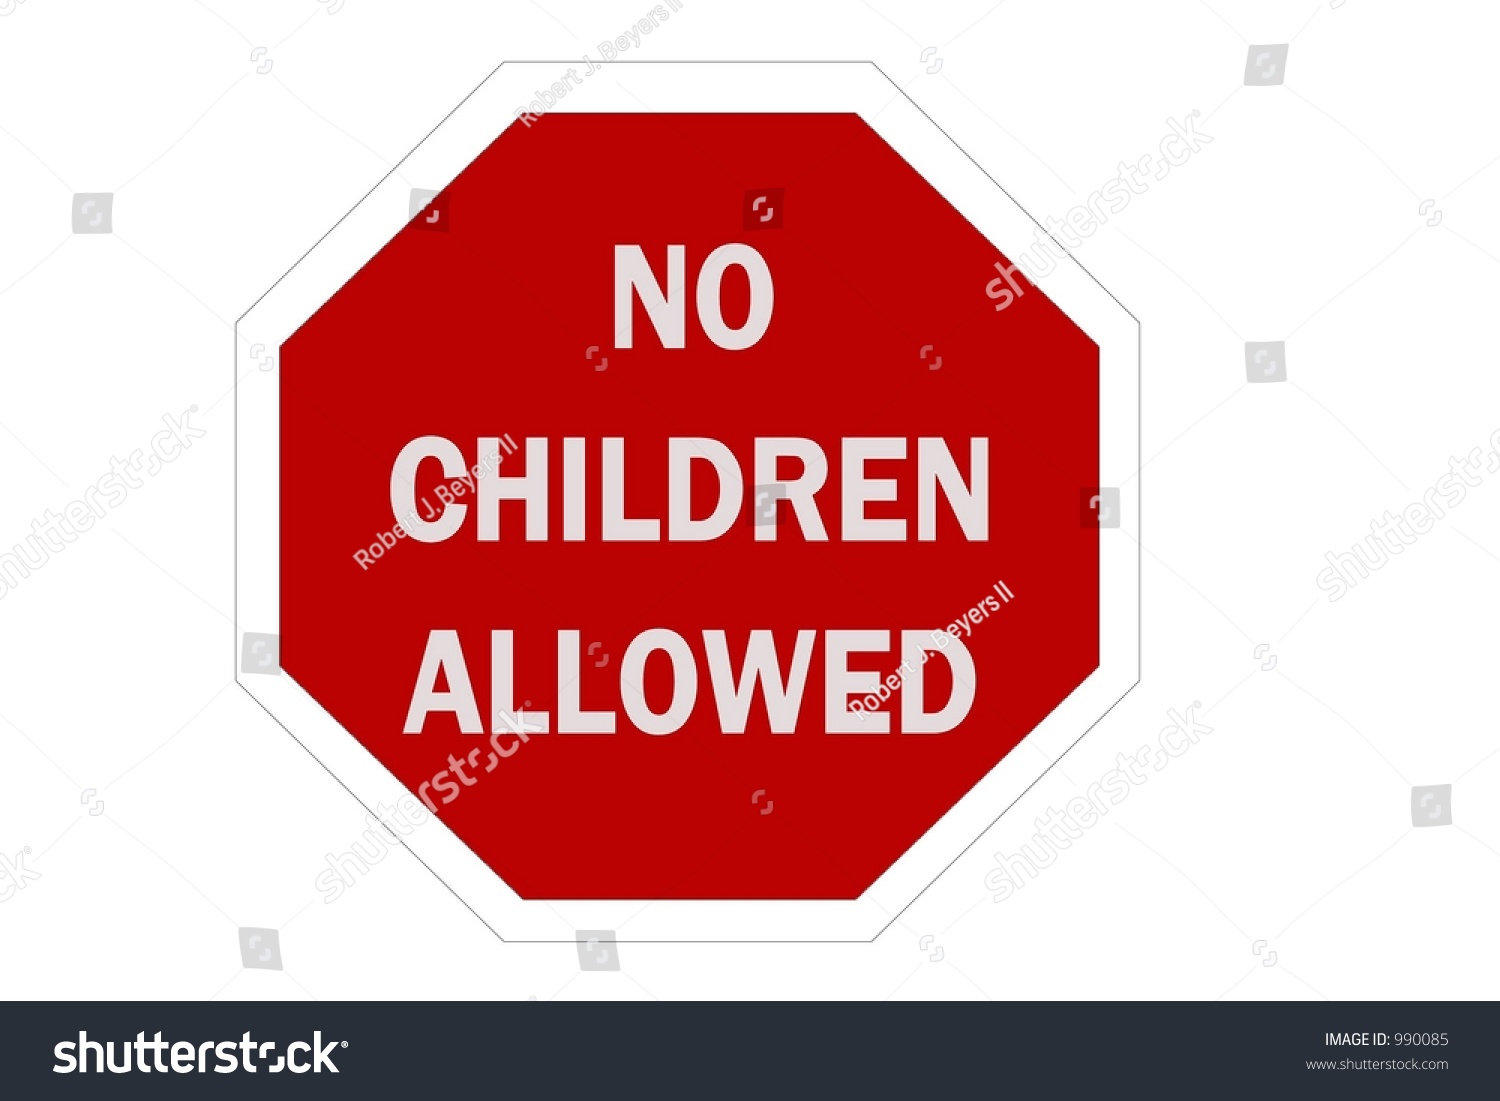 Red Octagon Sign With A Message Of "No Children Allowed" Isolated On A